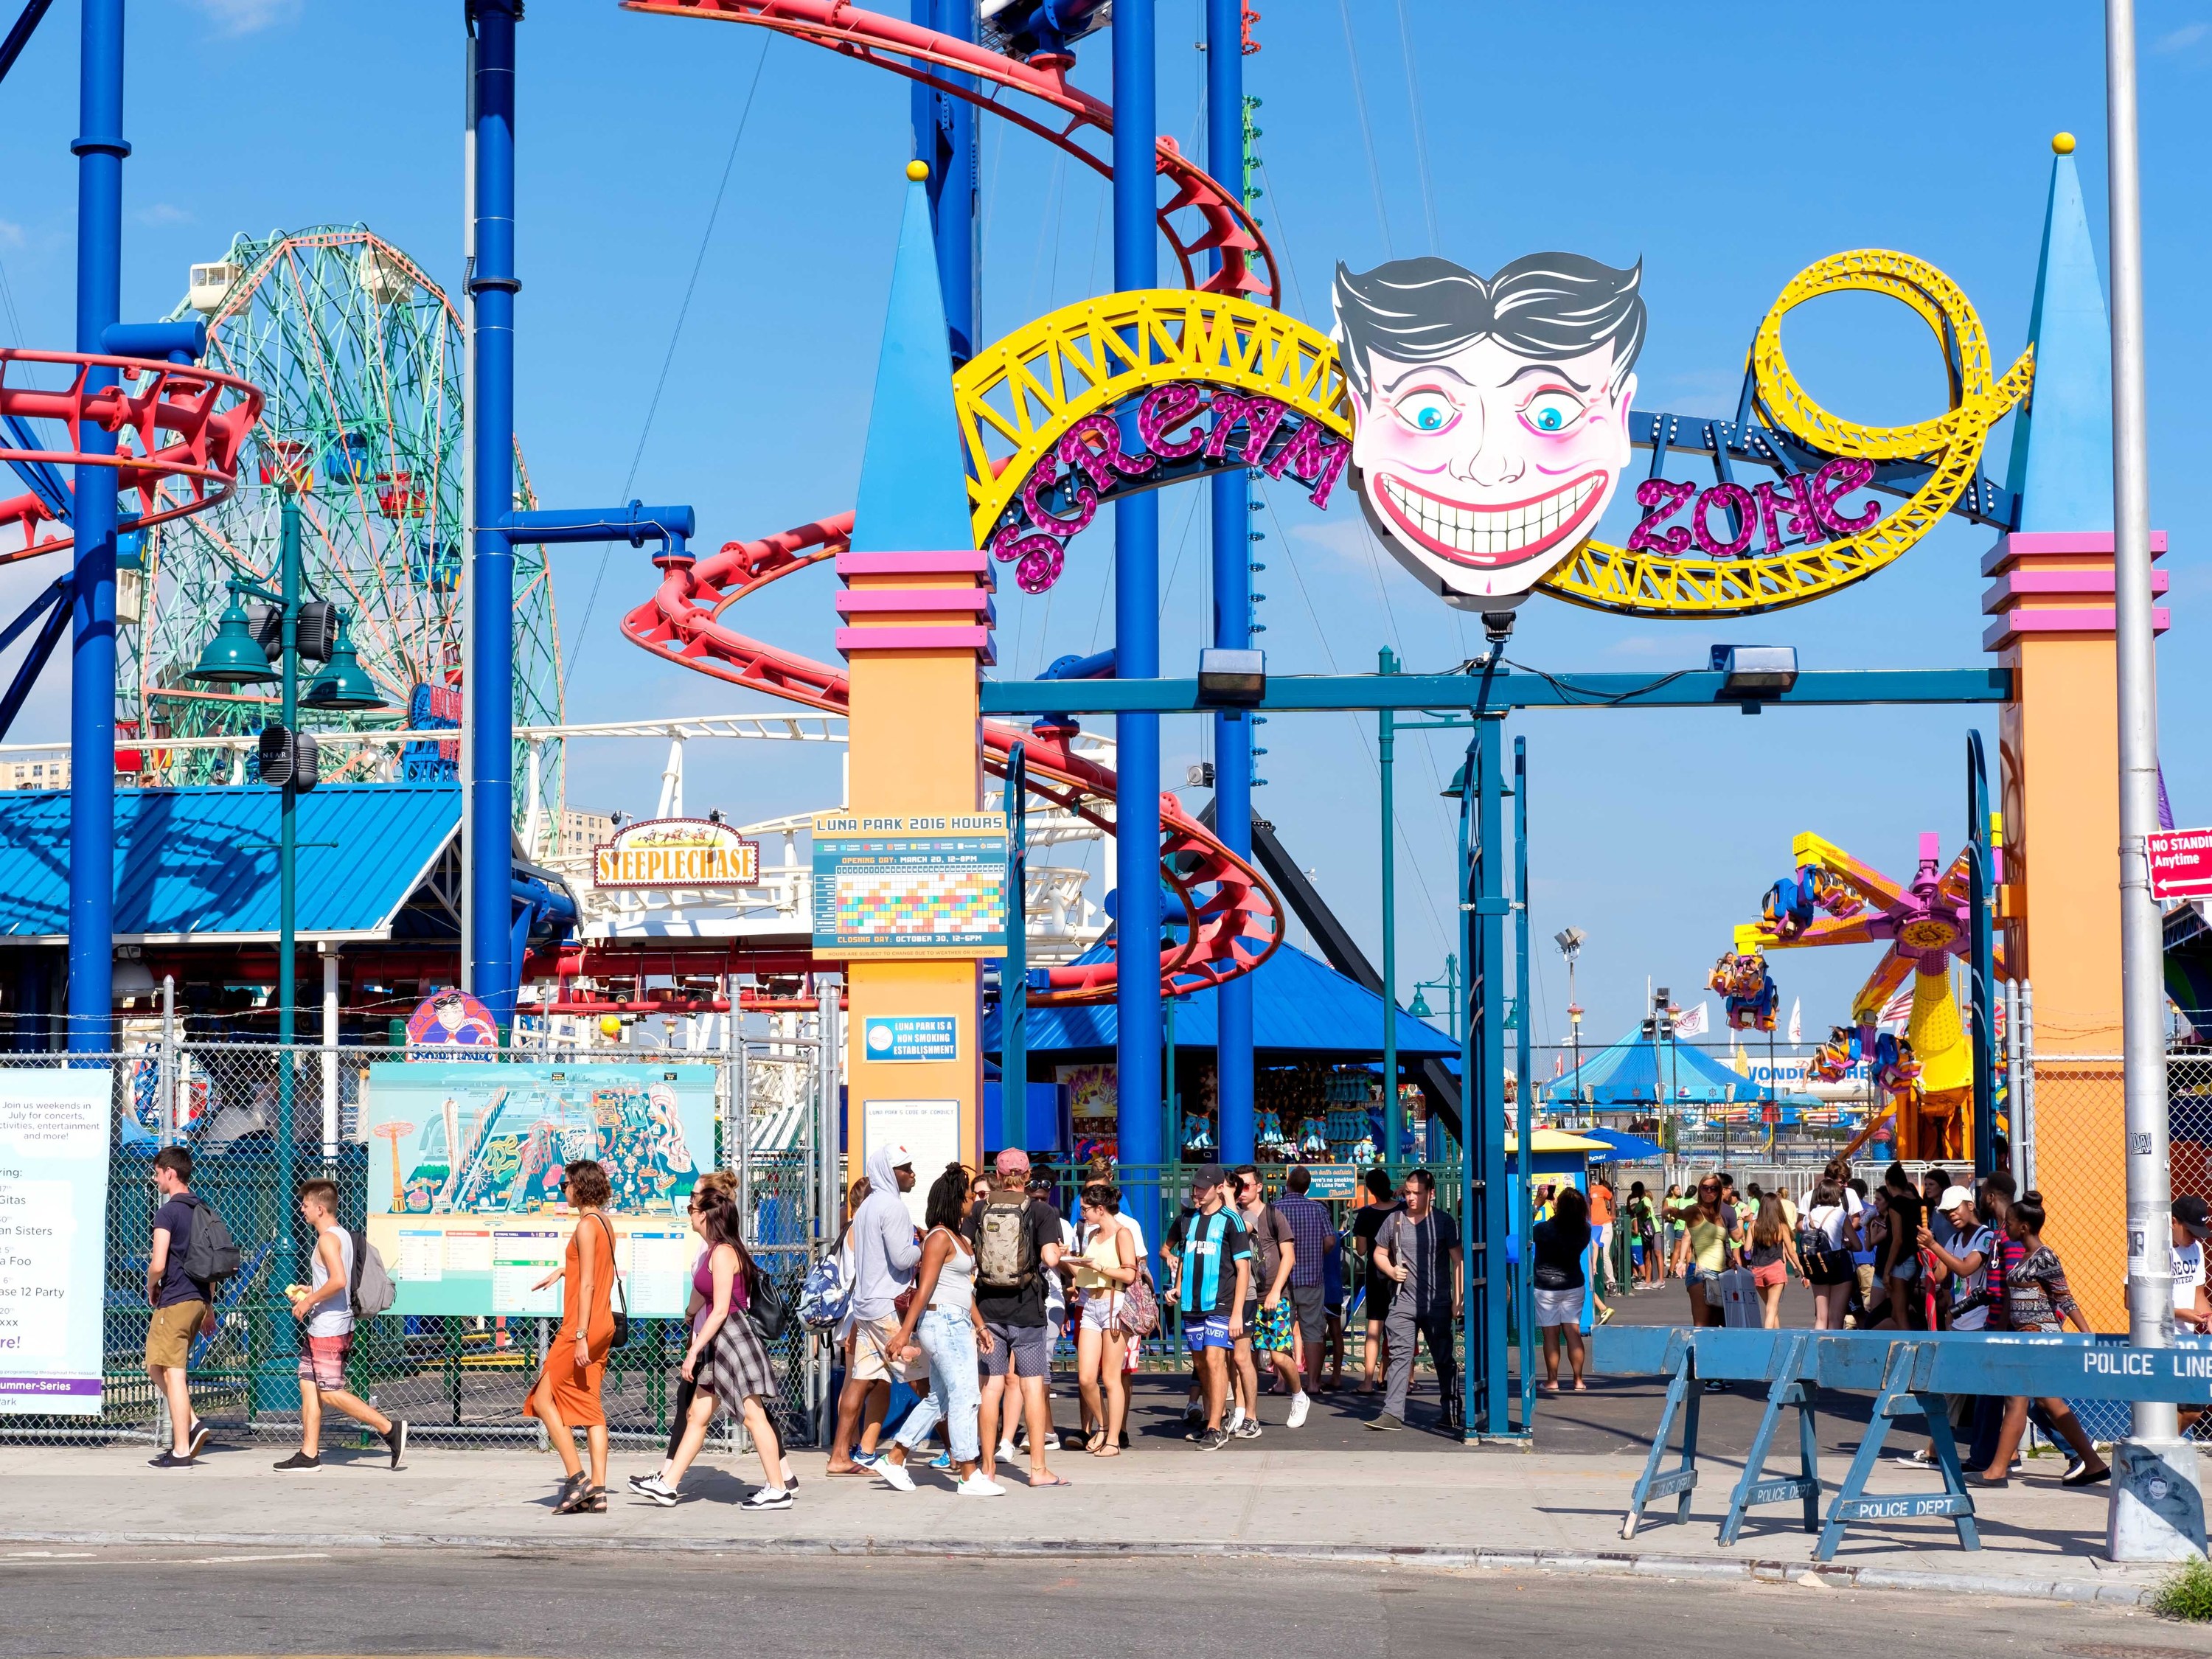 Ask a historian: What’s the story with Coney Island’s brothels of yore?